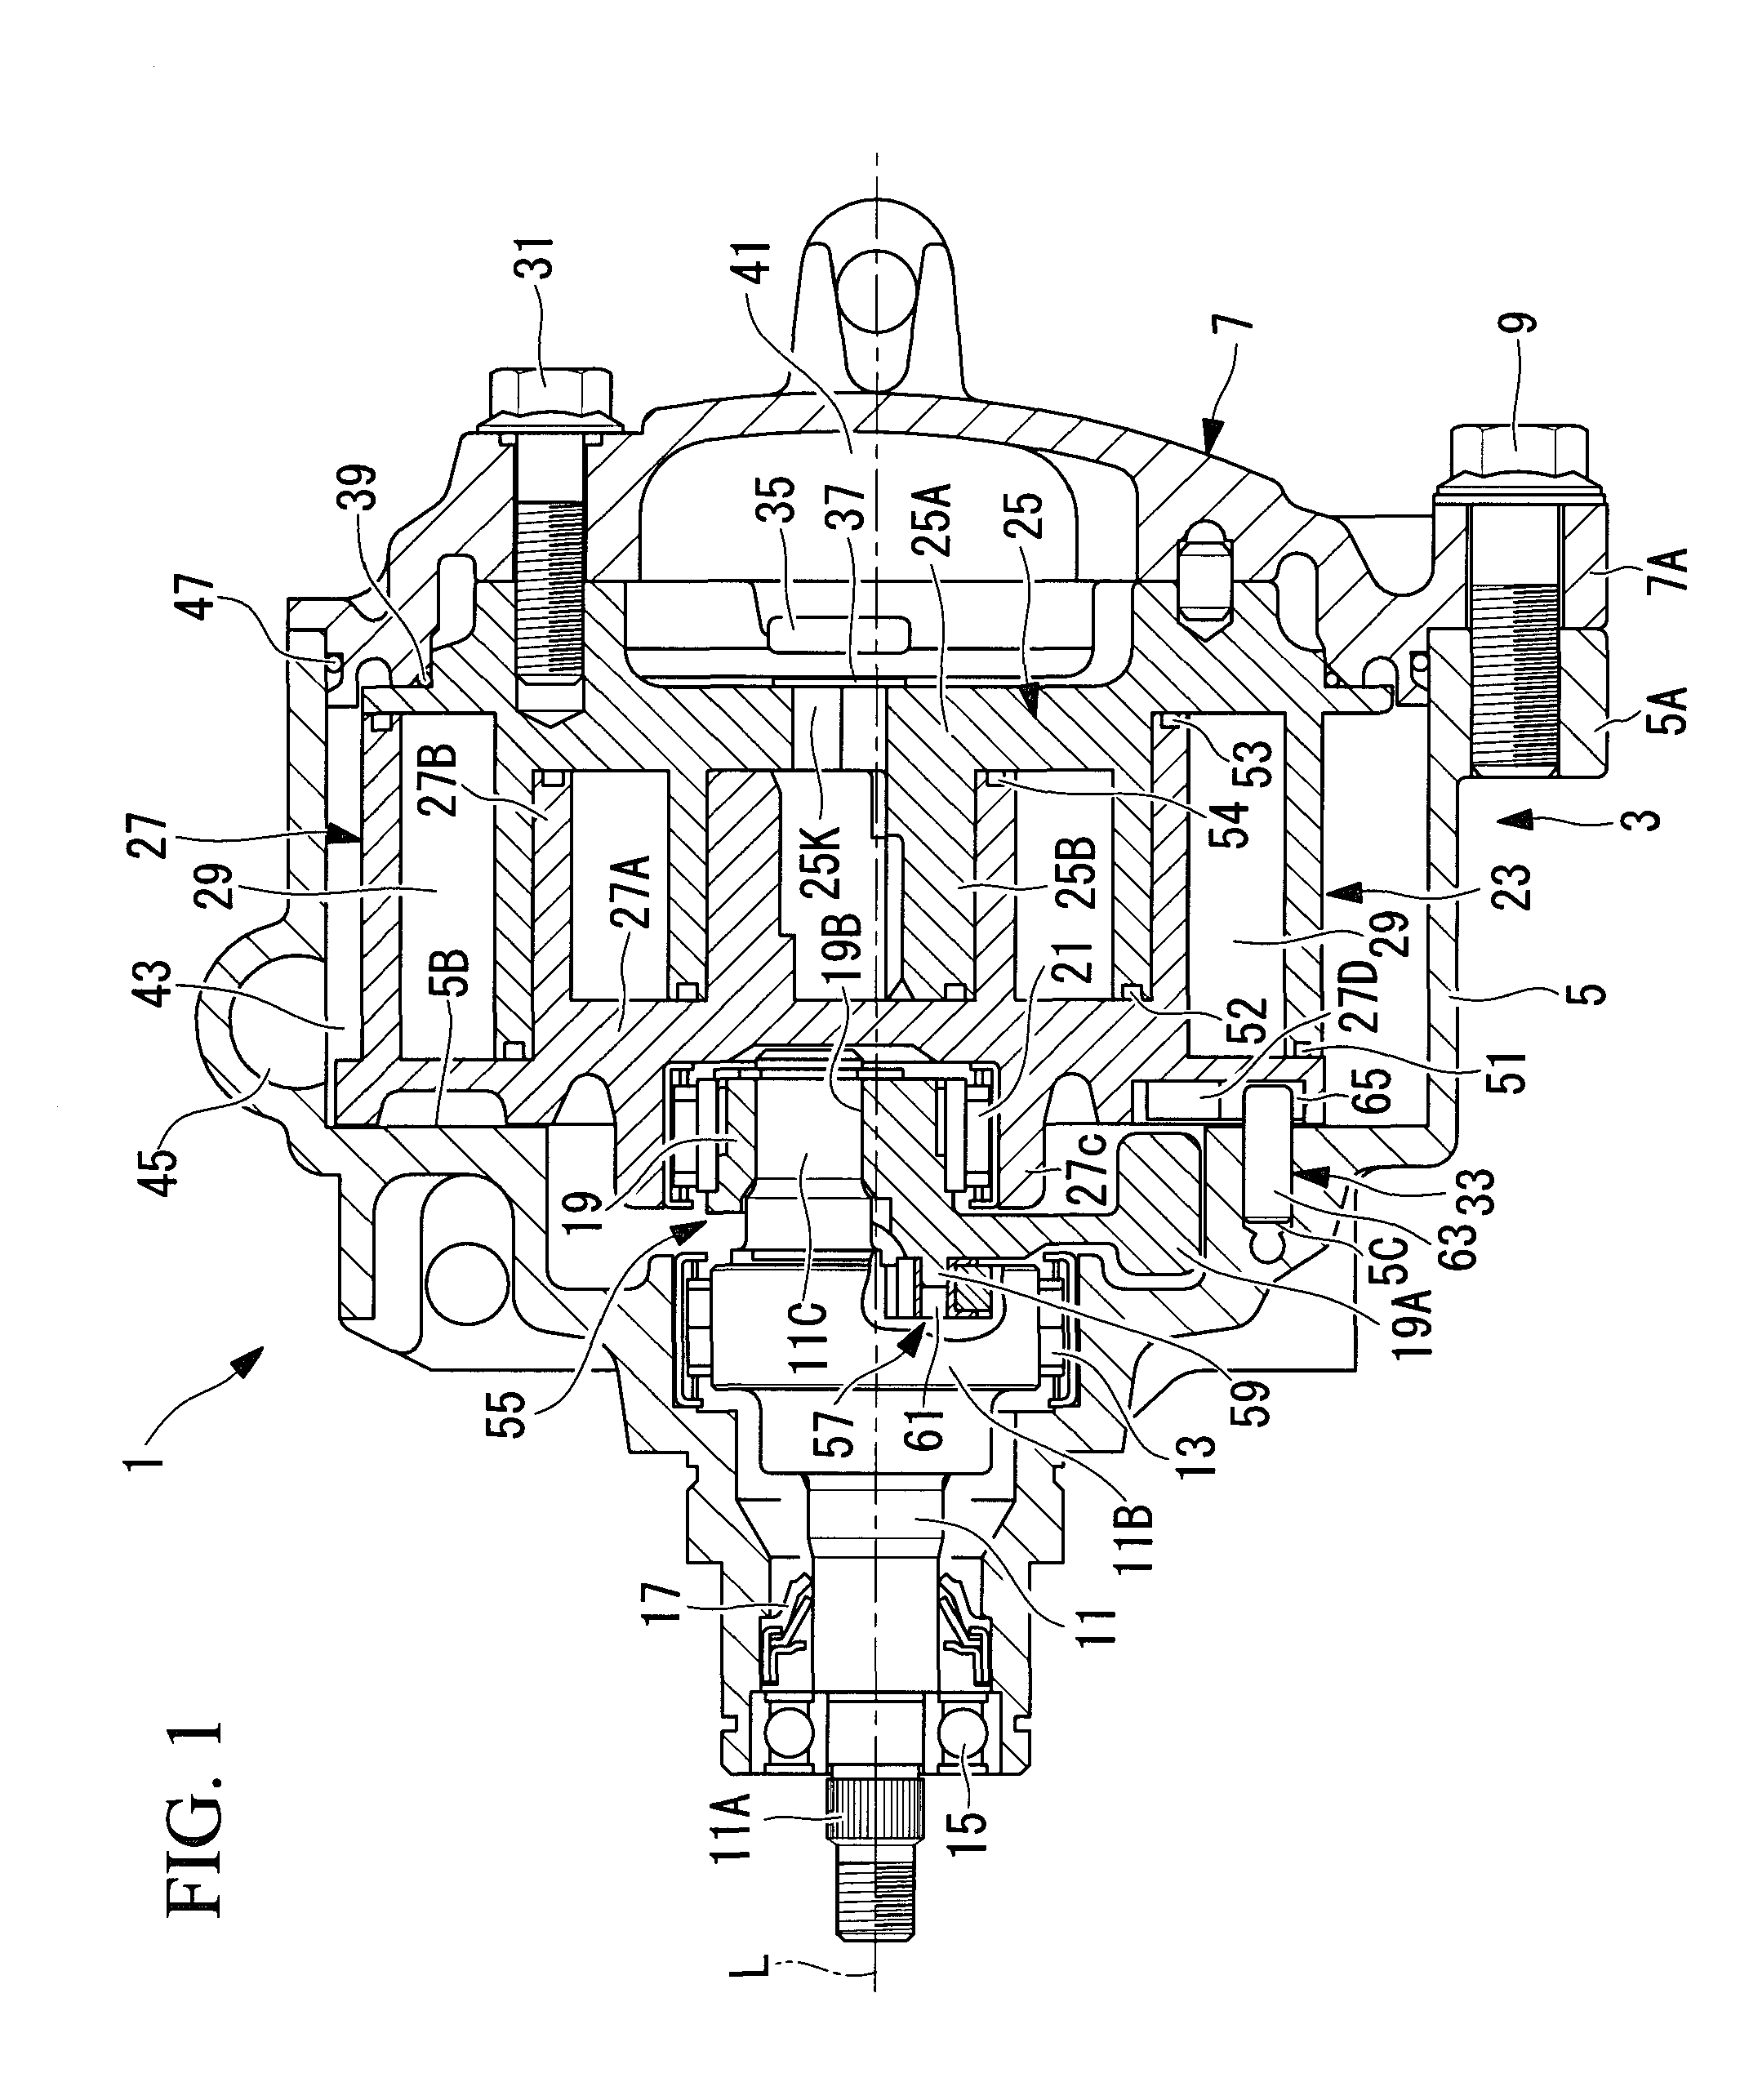 Scroll compressor with improved rotation prevention mechanism